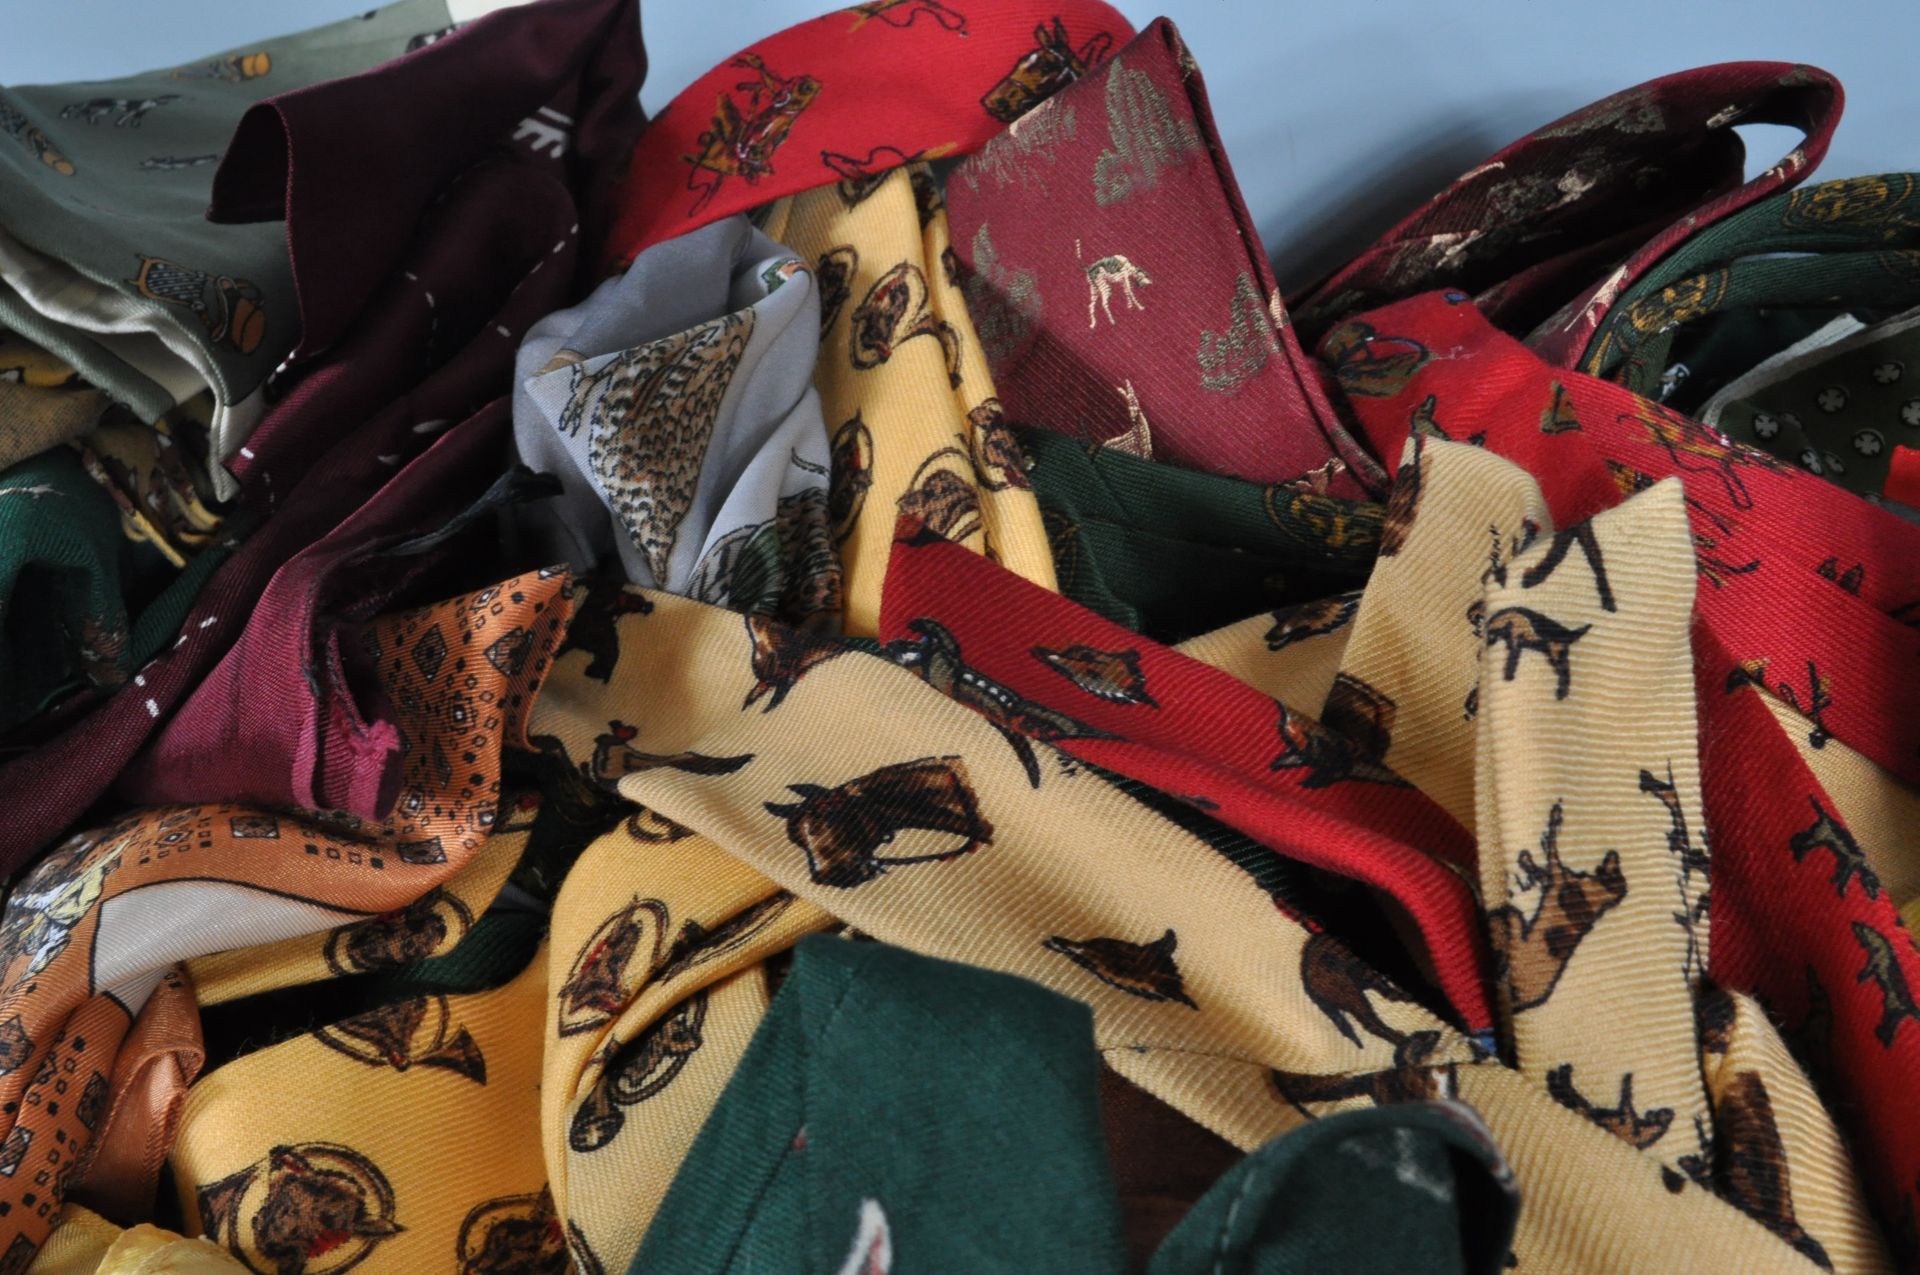 COLLECTION OF VINTAGE 1950S MENS TIES SCARVES AND CRAVATS INCLUDING SEVERAL TOOTAL EXAMPLES. - Image 7 of 8